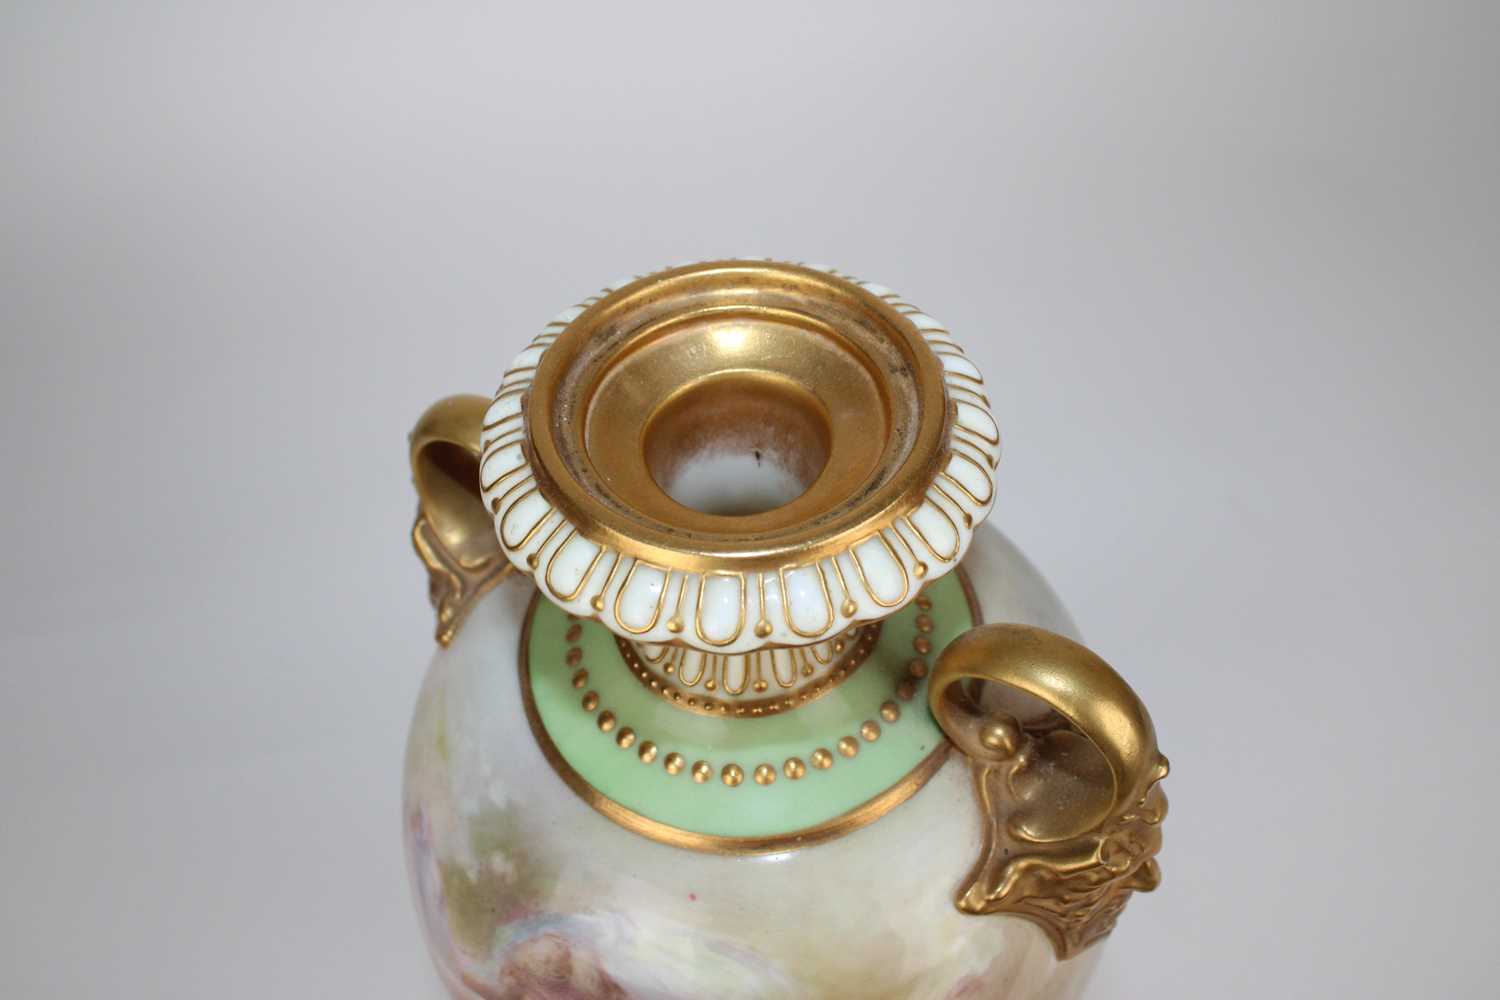 George White for Royal Doulton "Leda and the Swan" Urn - Image 10 of 20